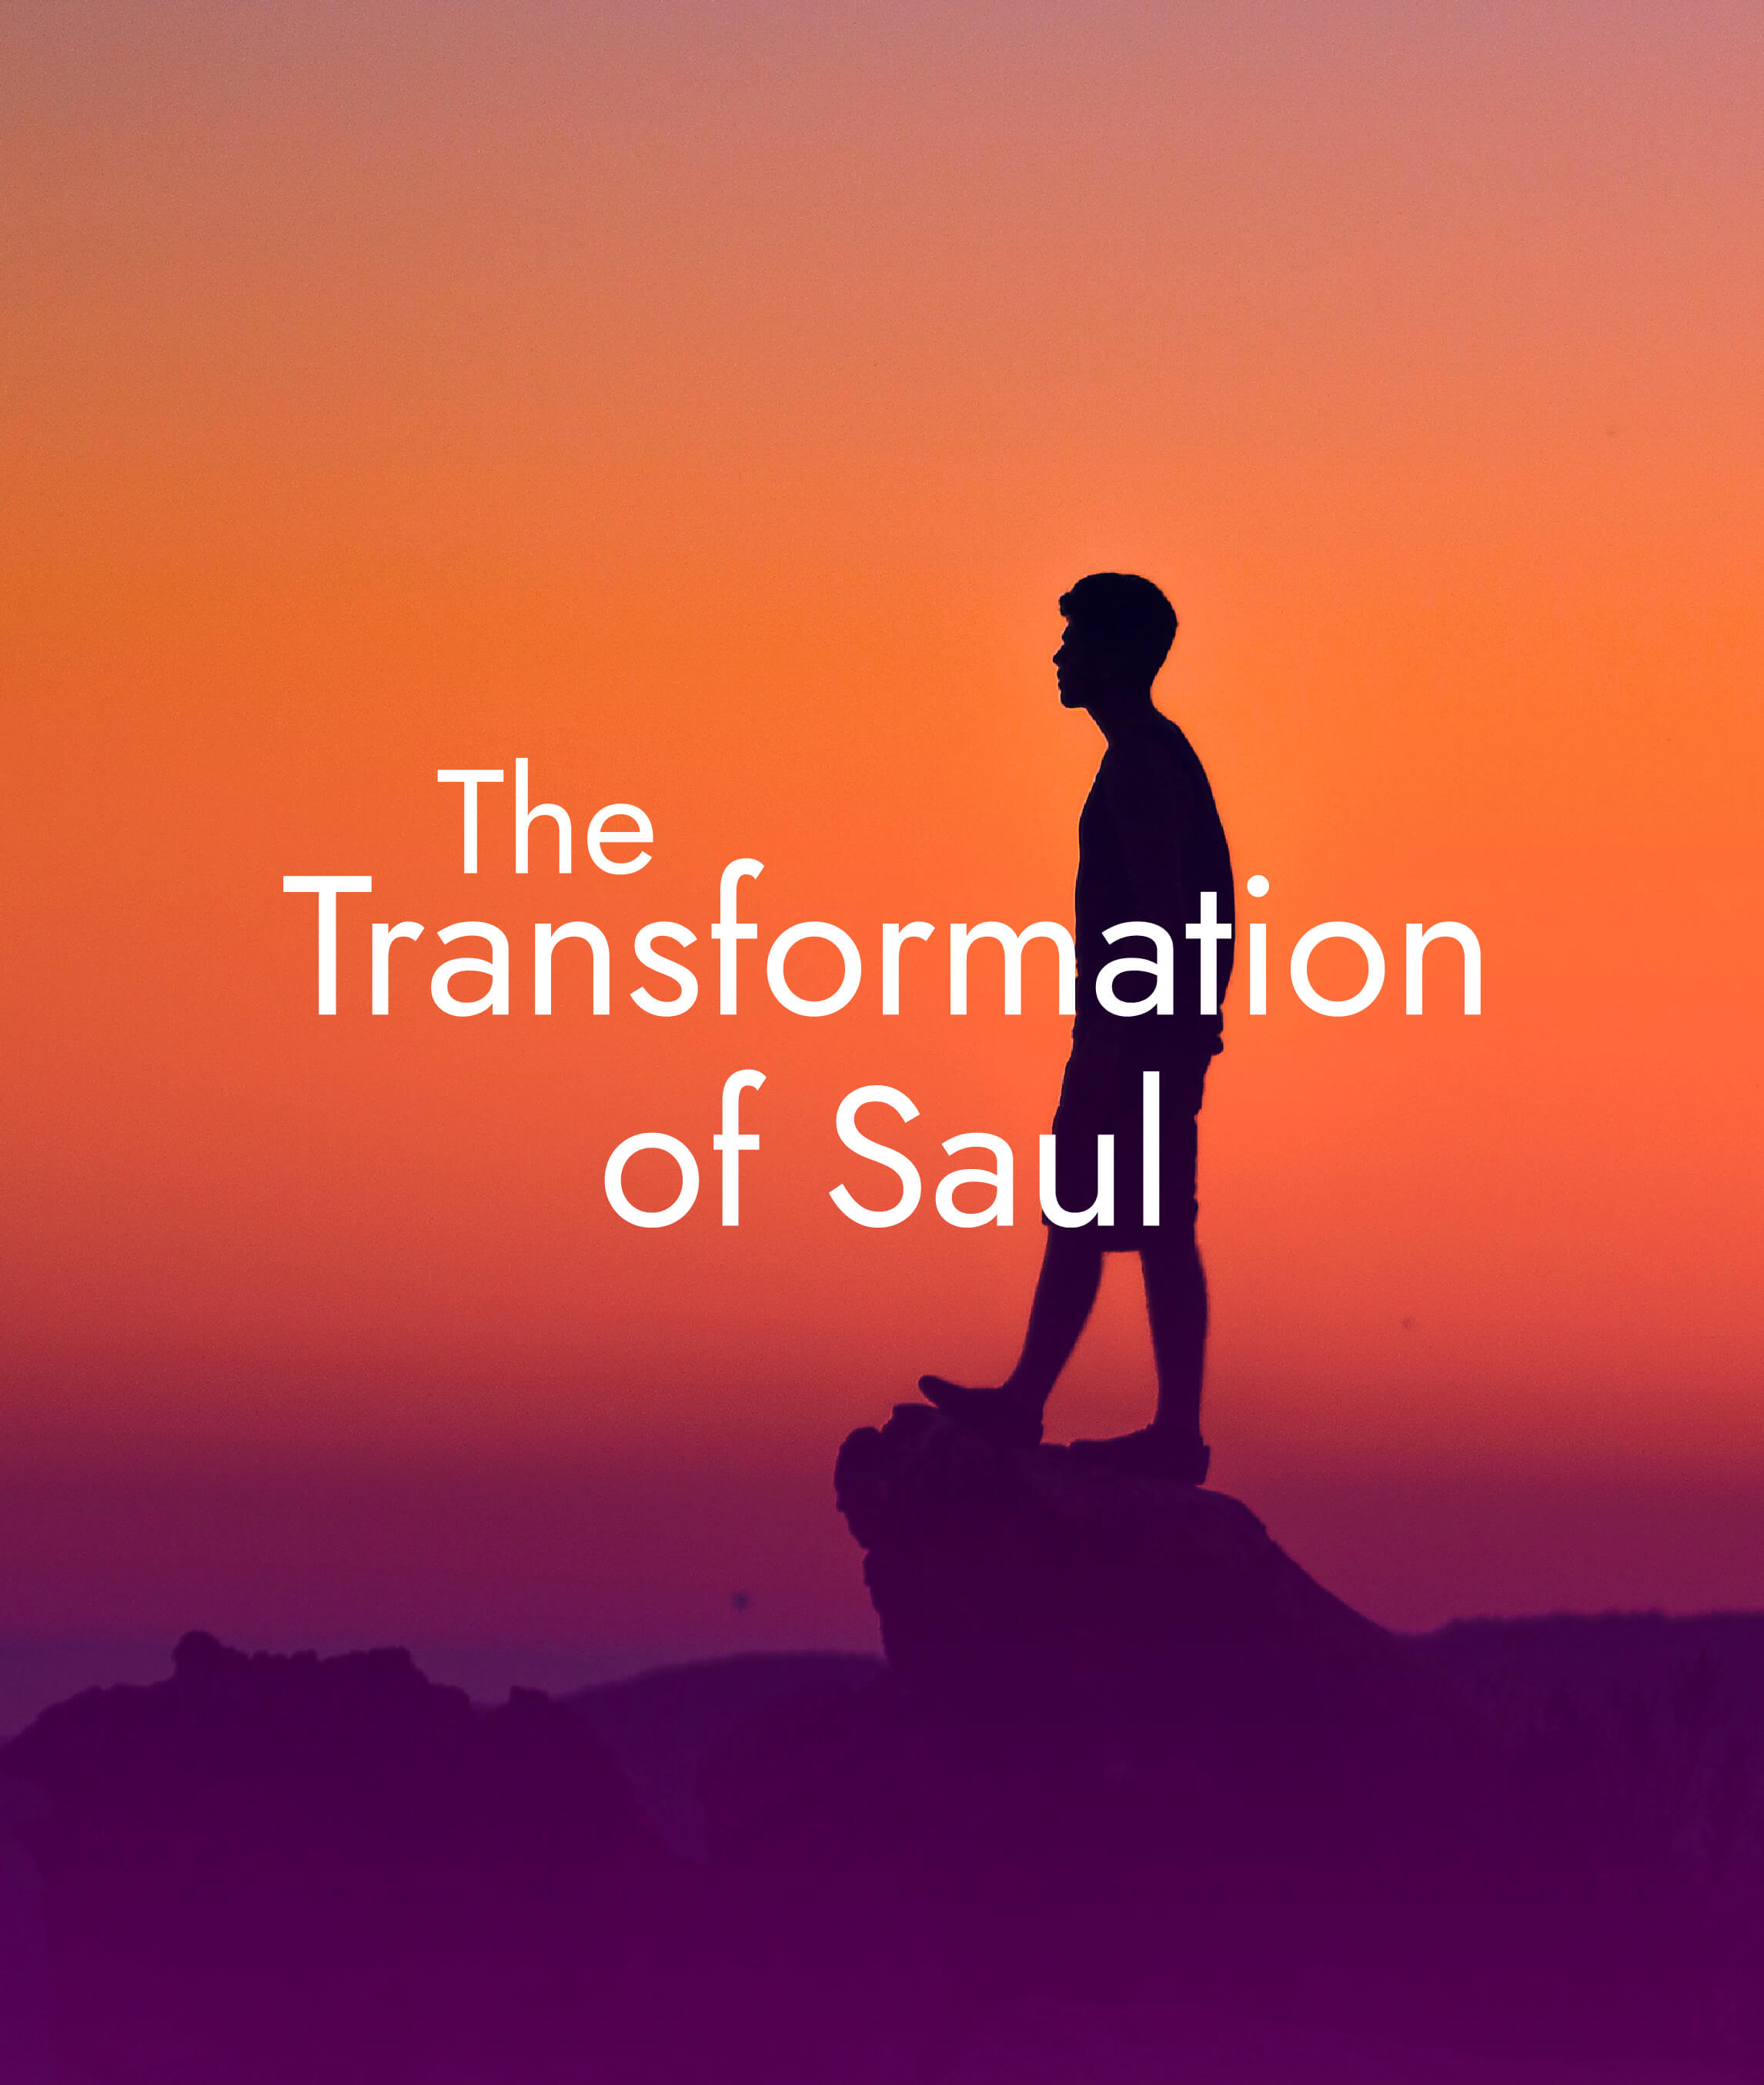 The Transformation of Saul